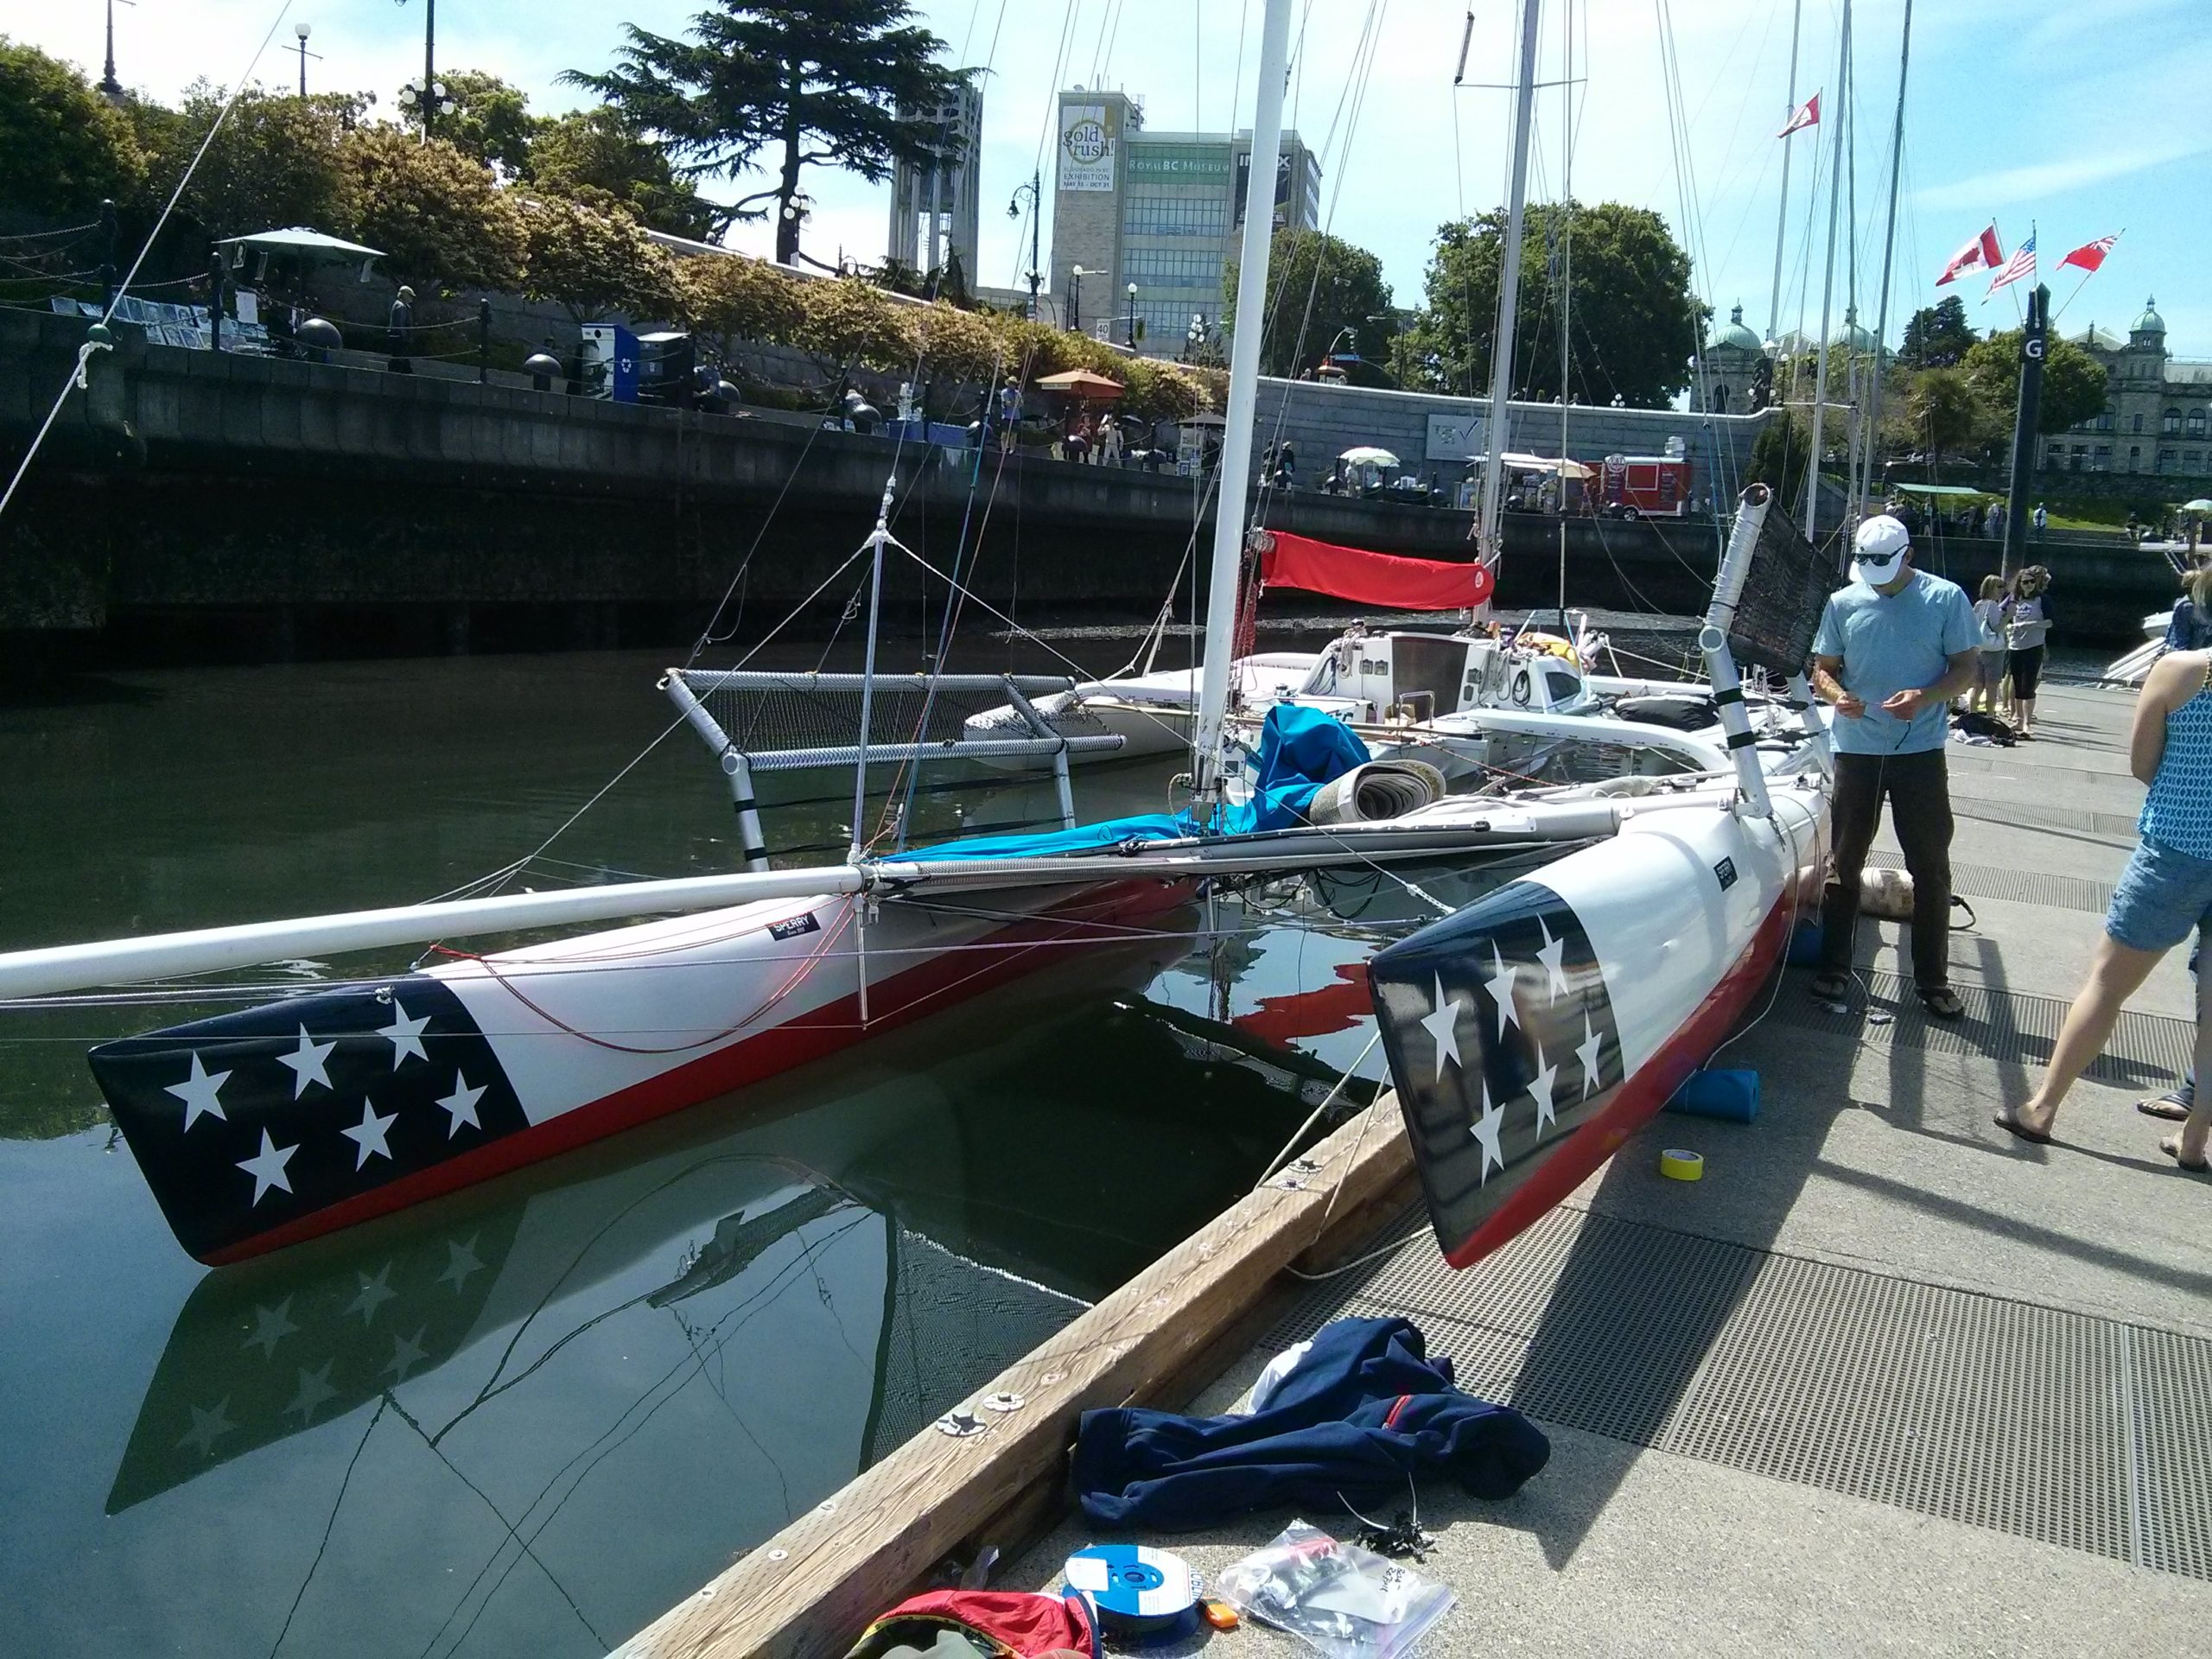 R2AK Stage 1 and "They're All Safe" Northwest Yachting